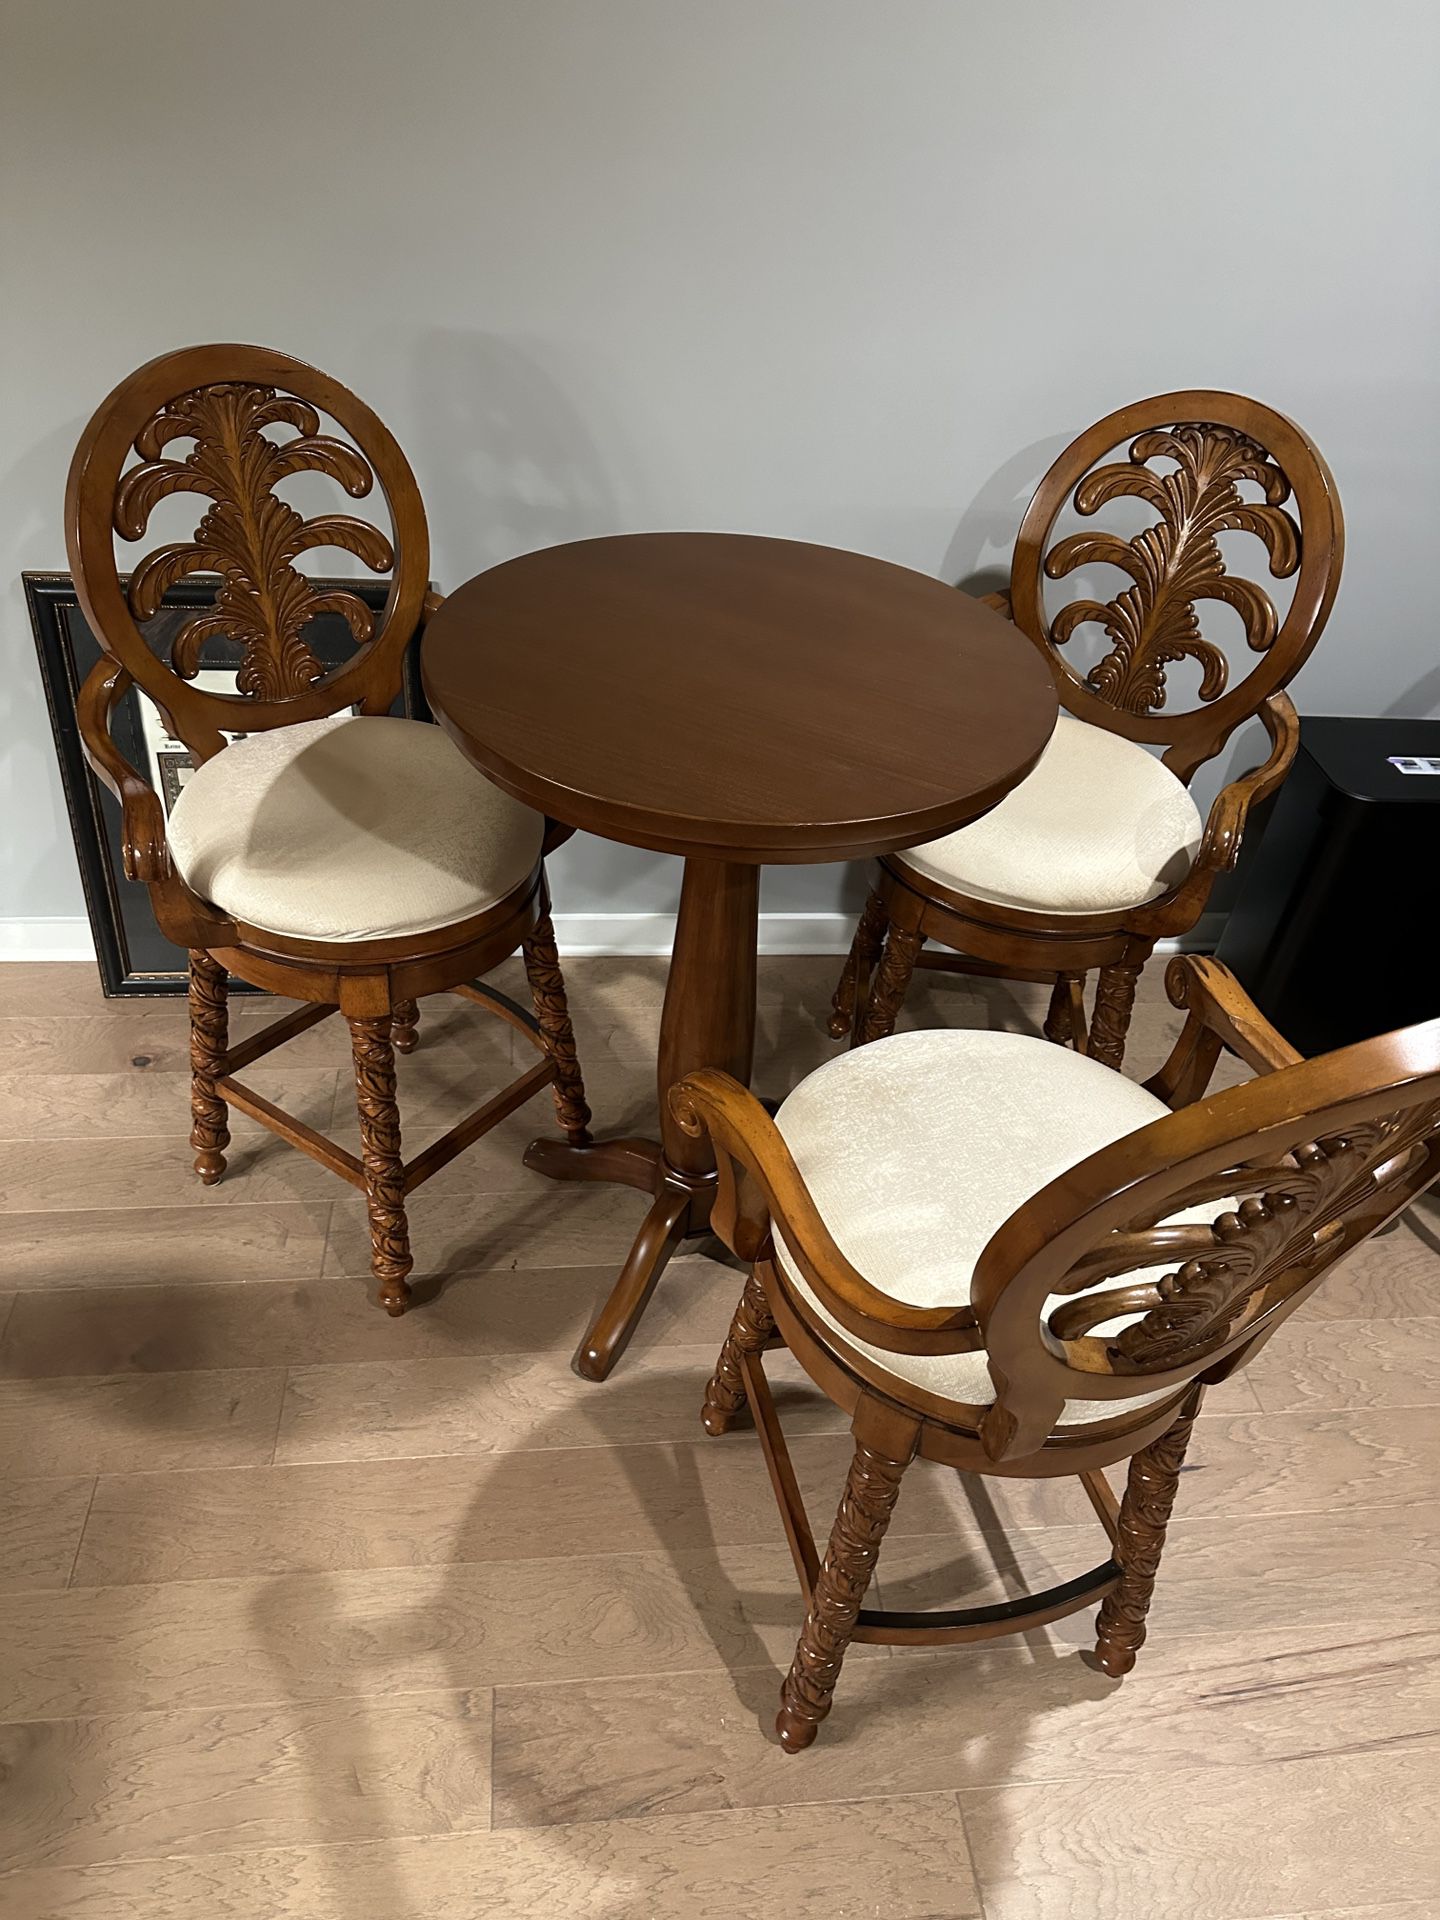 Pub Table With Three Chairs